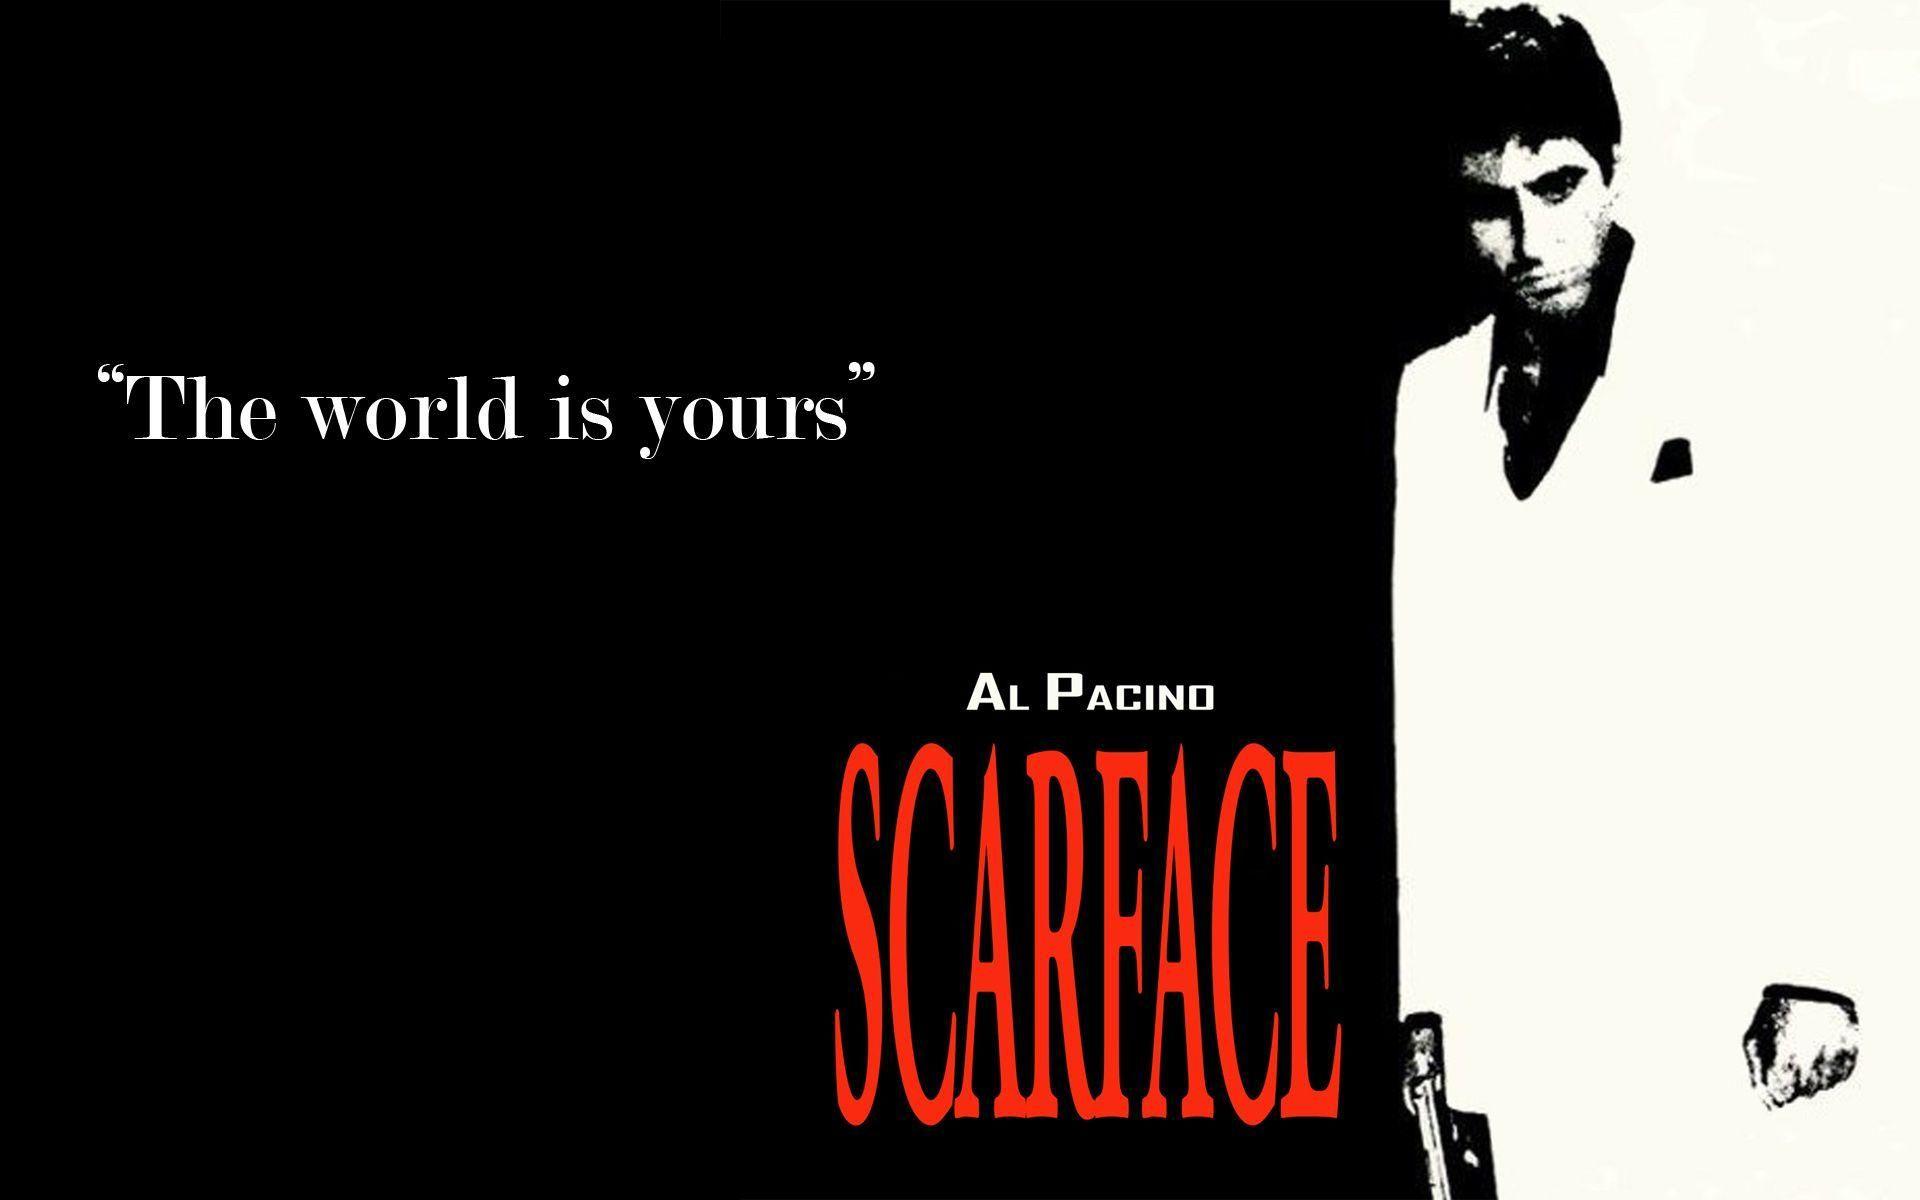 Scarface Quotes Wallpapers Top Free Scarface Quotes Backgrounds Wallpaperaccess